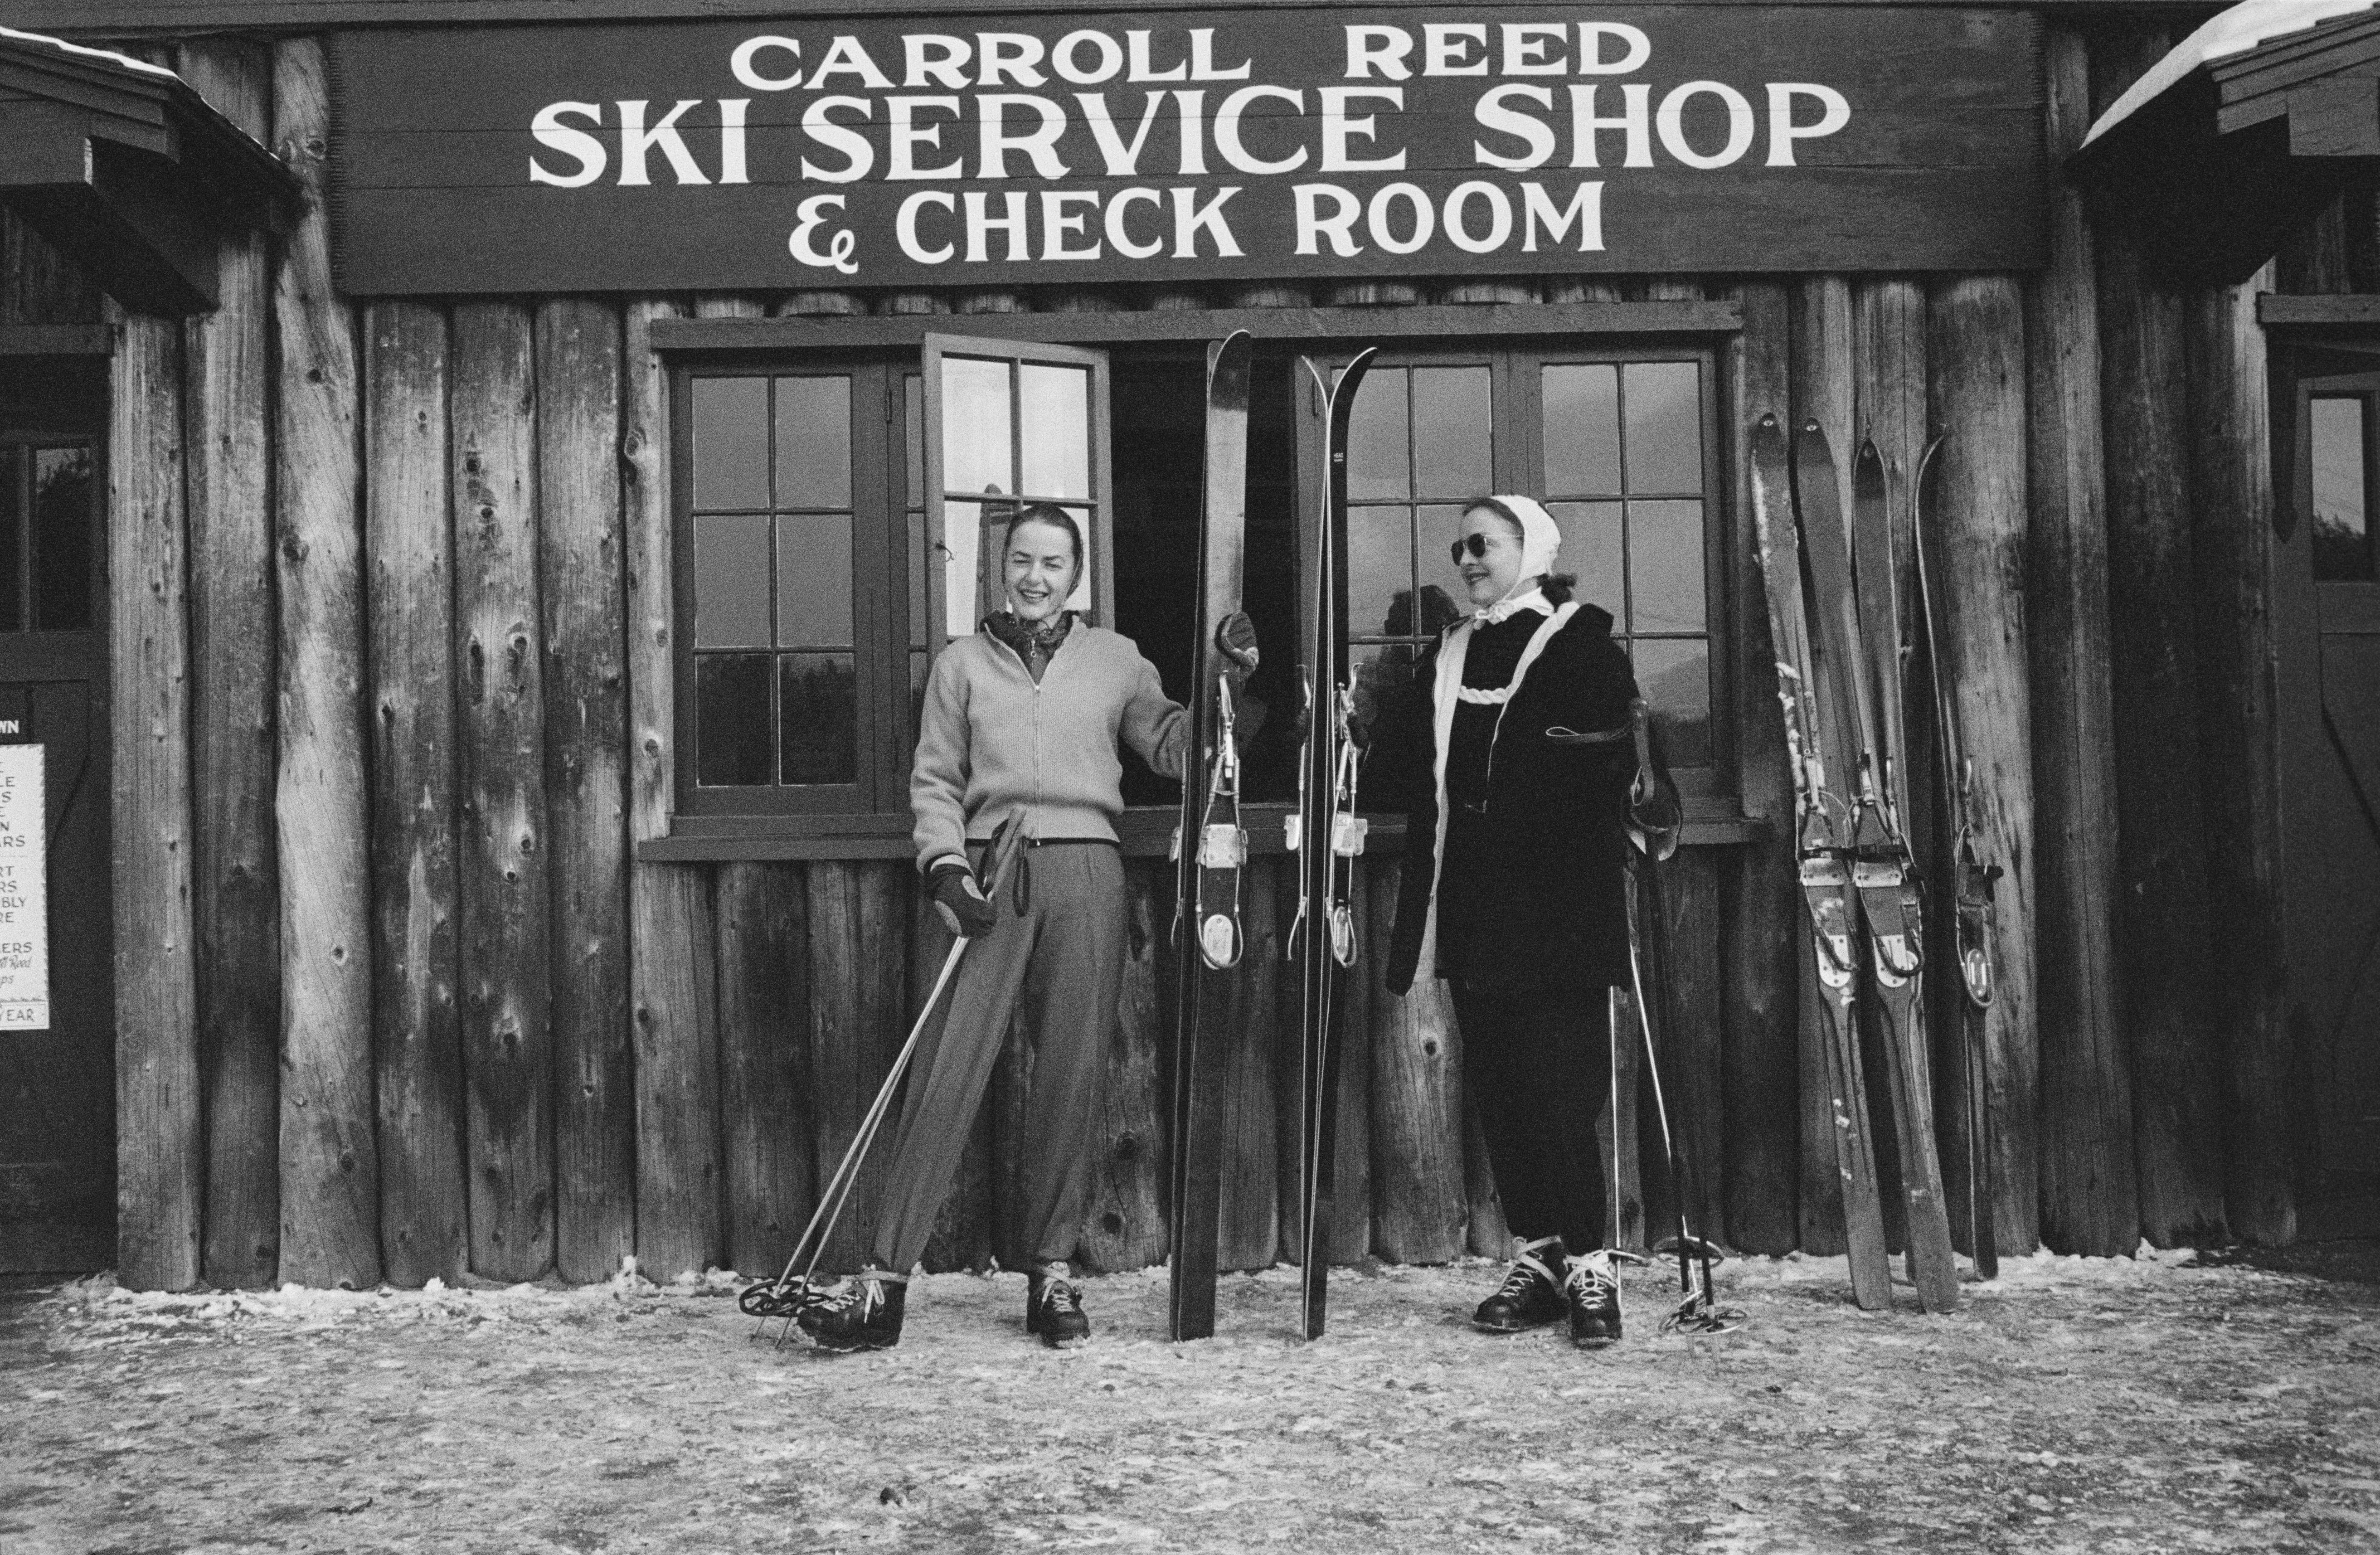 Slim Aarons Black and White Photograph – Palm Bay Club, Nachlass-Fotografie: 1950er Jahre Ski in New Hampshire